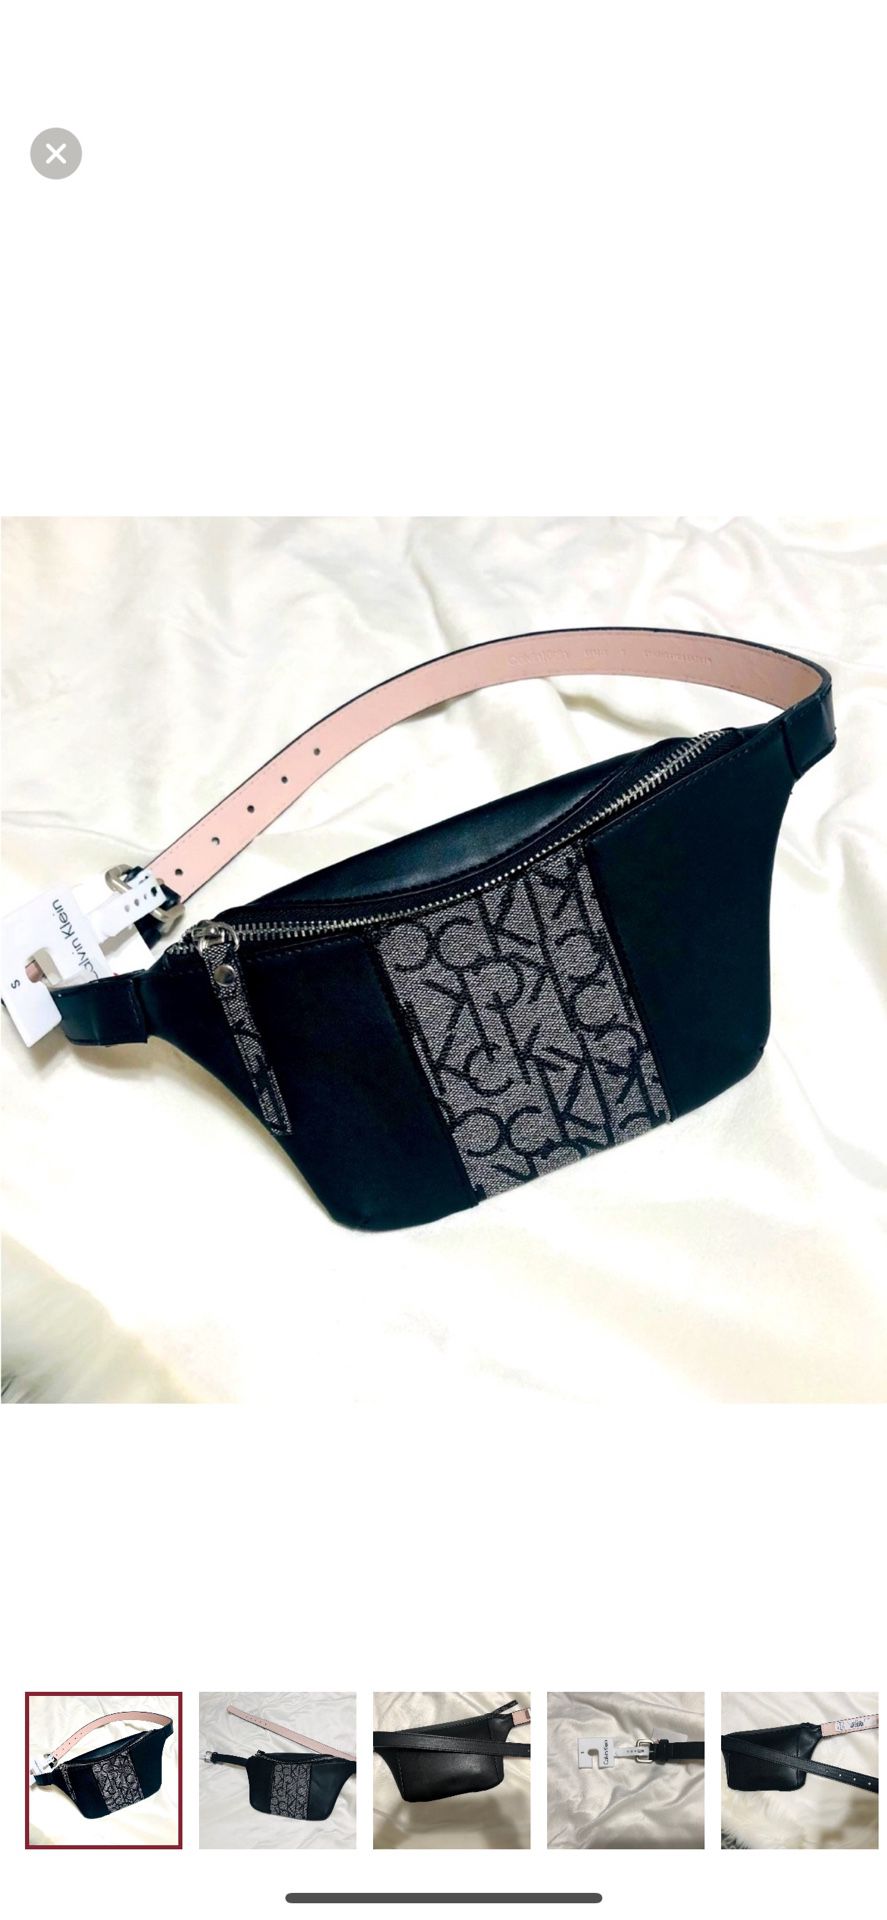 Authentic Calvin Klein Waist Bag/Fanny Pack (Brand New With Tags)